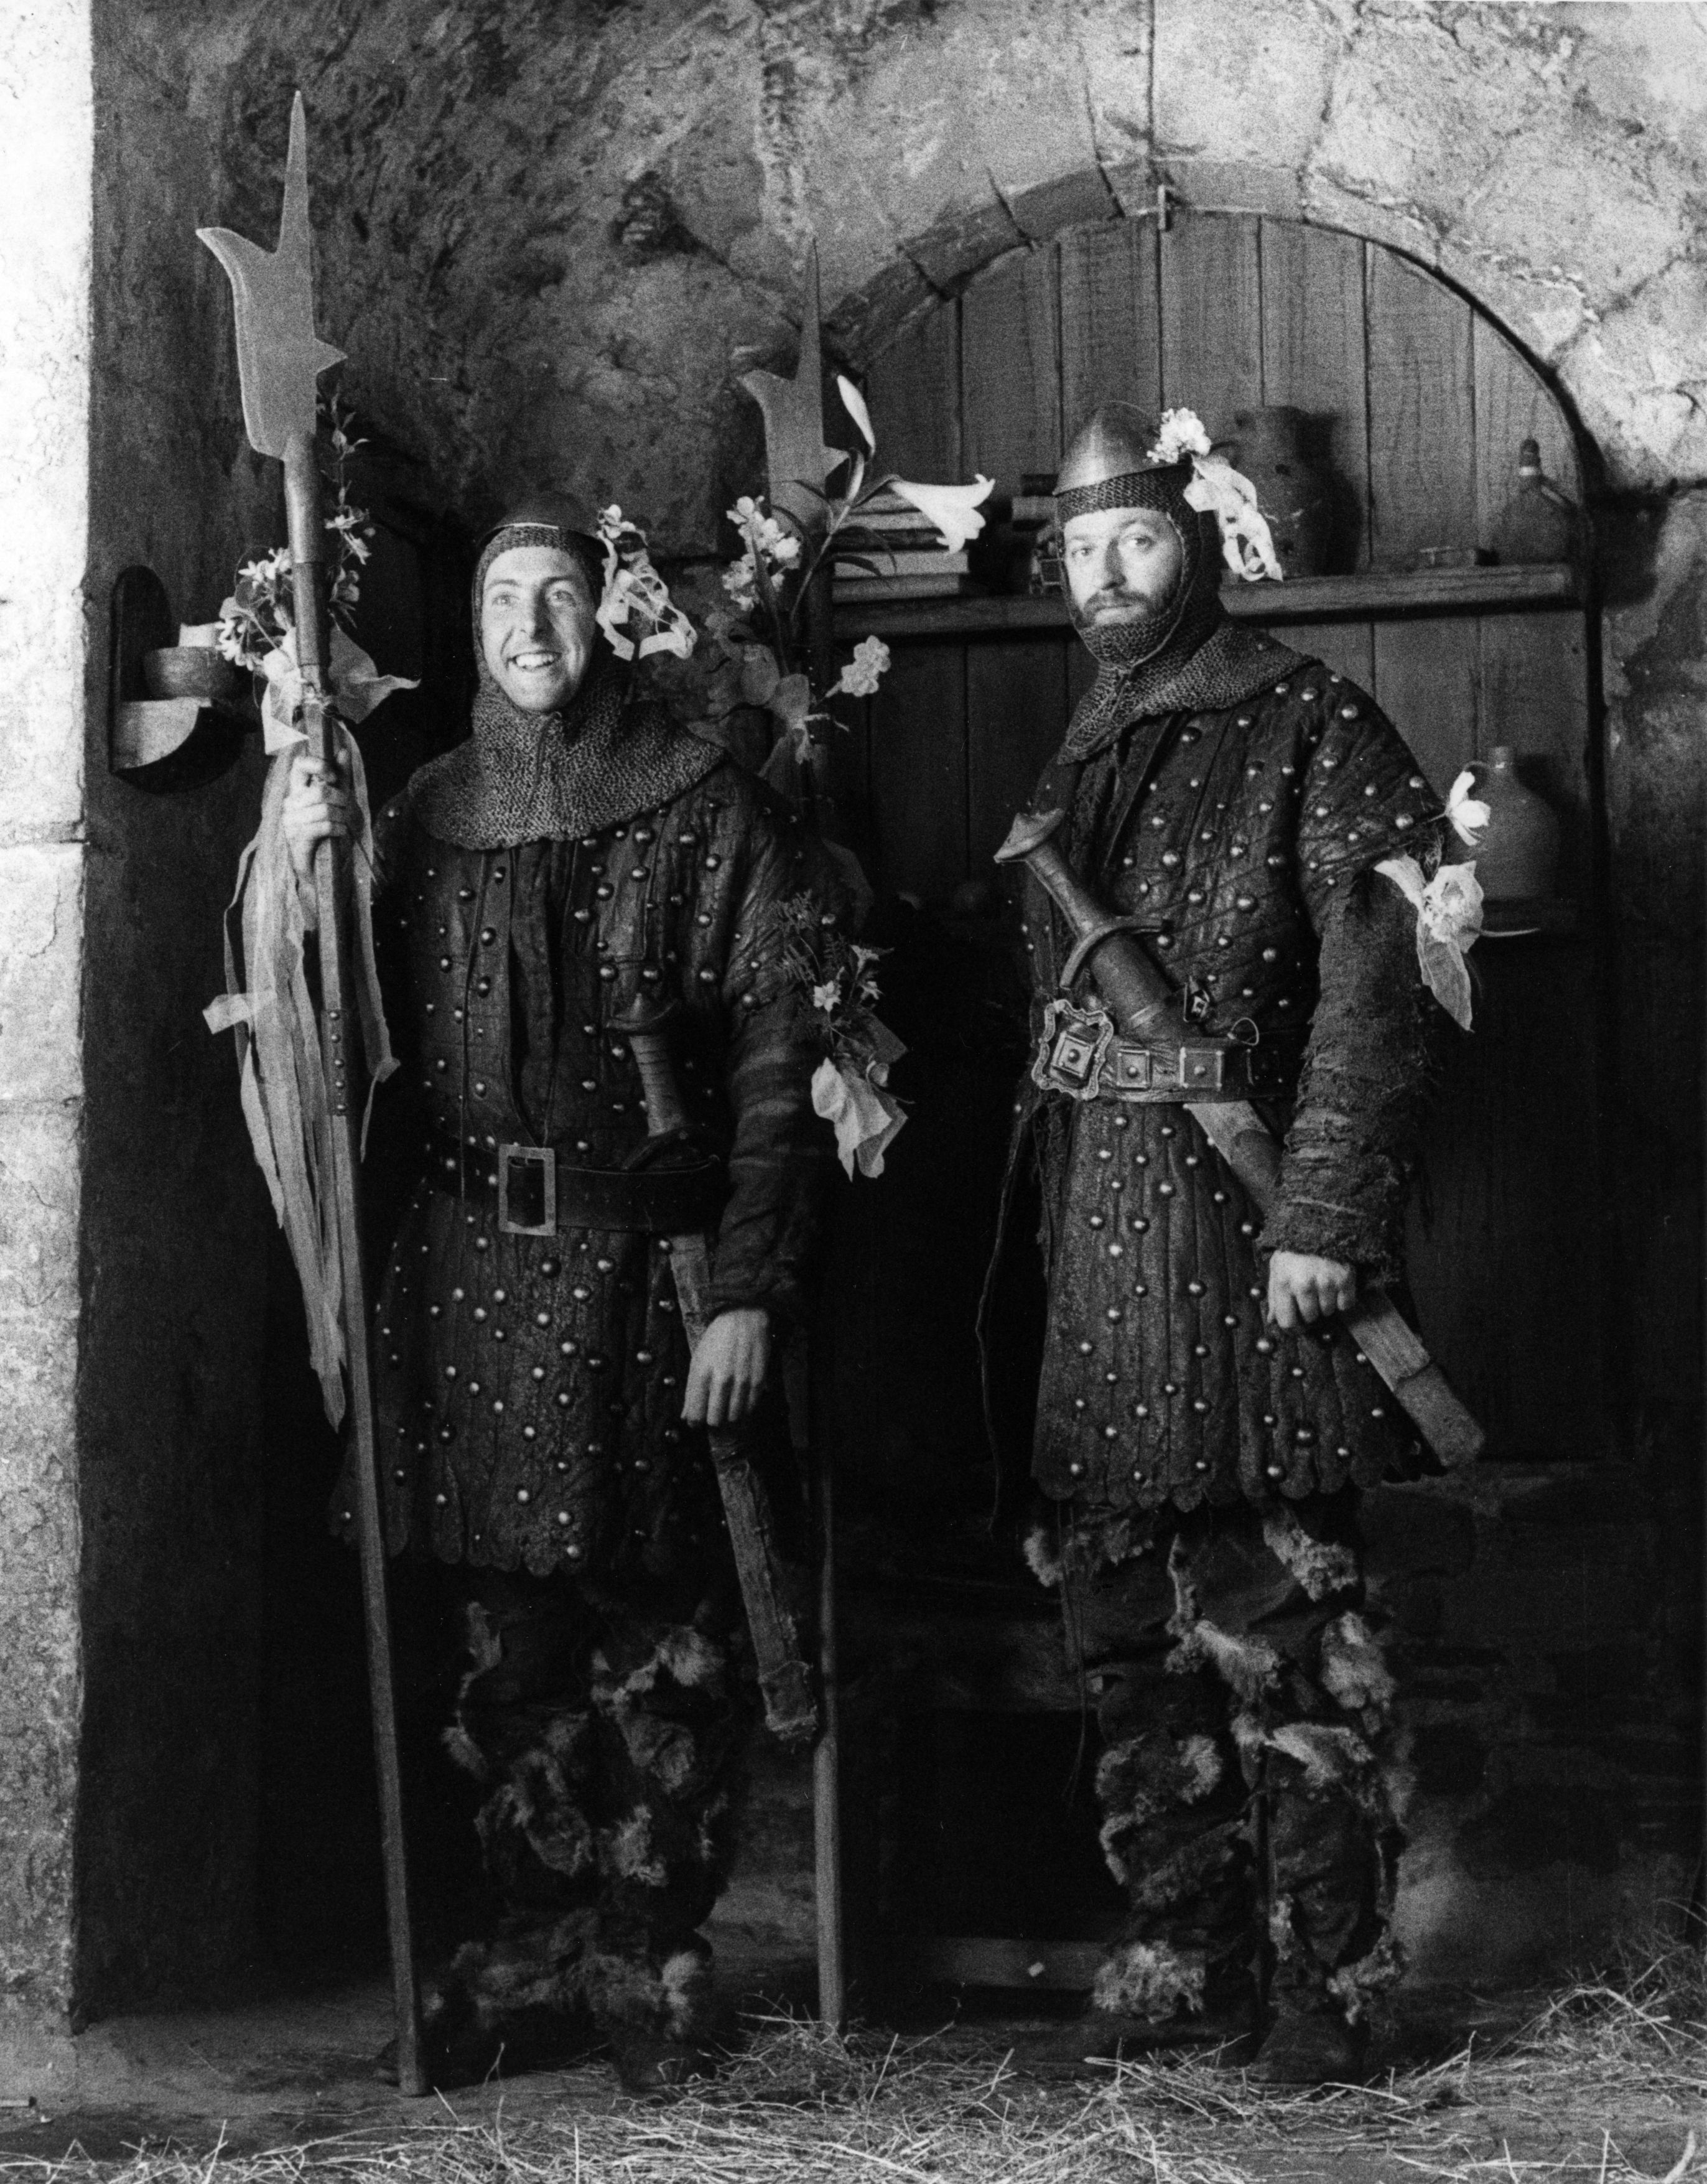 Graham Chapman, Eric Idle, and Monty Python in Monty Python and the Holy Grail (1975)